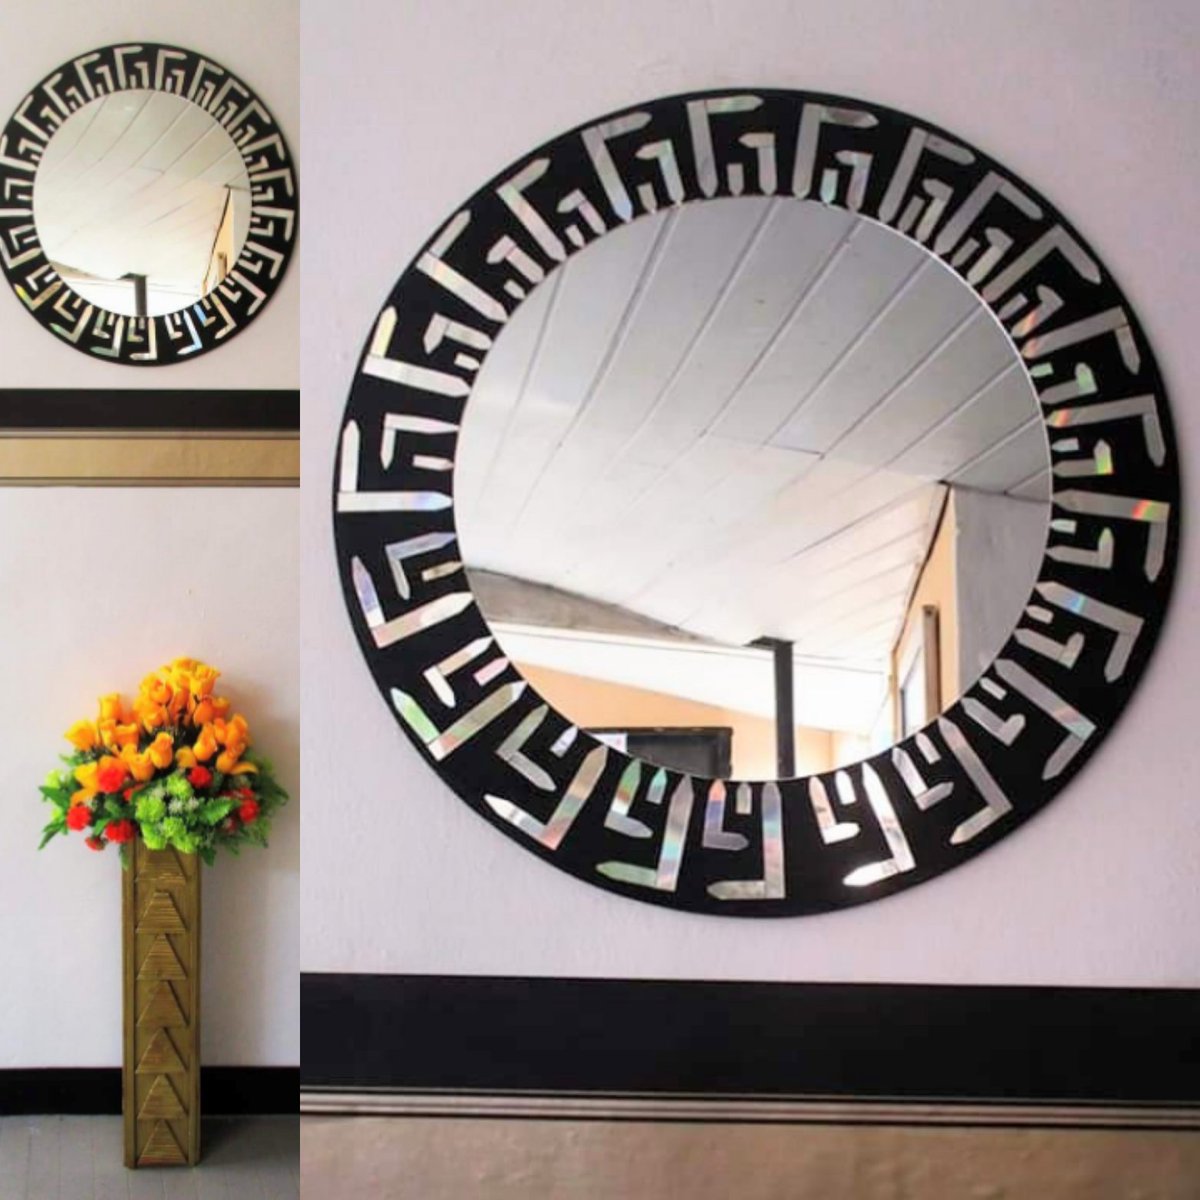 Circ Wall Mirror.
Handmade Modern Wall Mirror for homes (#livingroom , #Bedroom , #Toilets , #Anteroom) and Offices

Price: 7k.

#mirror #livingroomdecor #handmade #madeinnaija #affordable